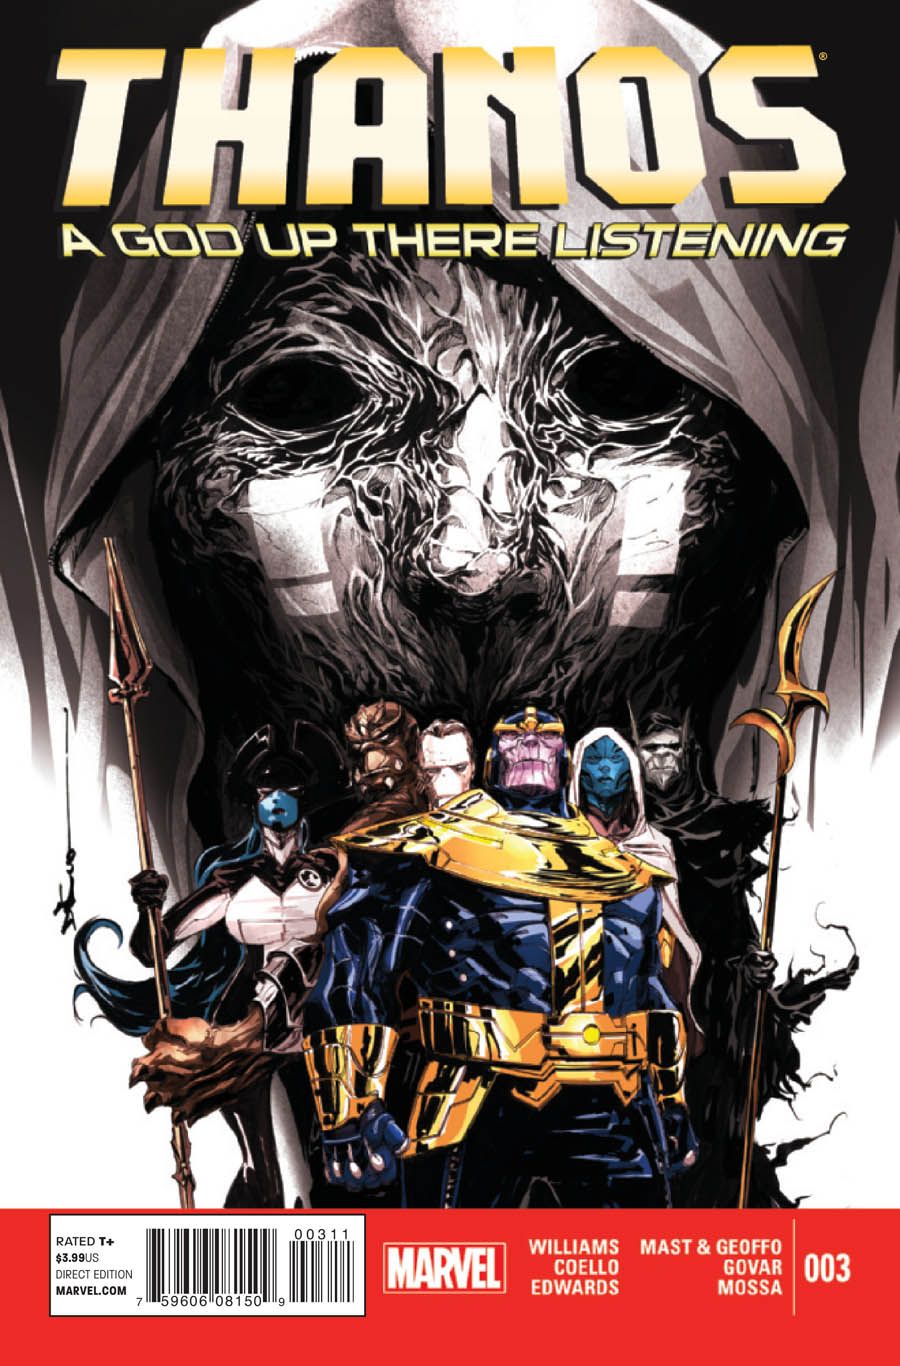 Thanos: A God Up There Listening #3 Comic